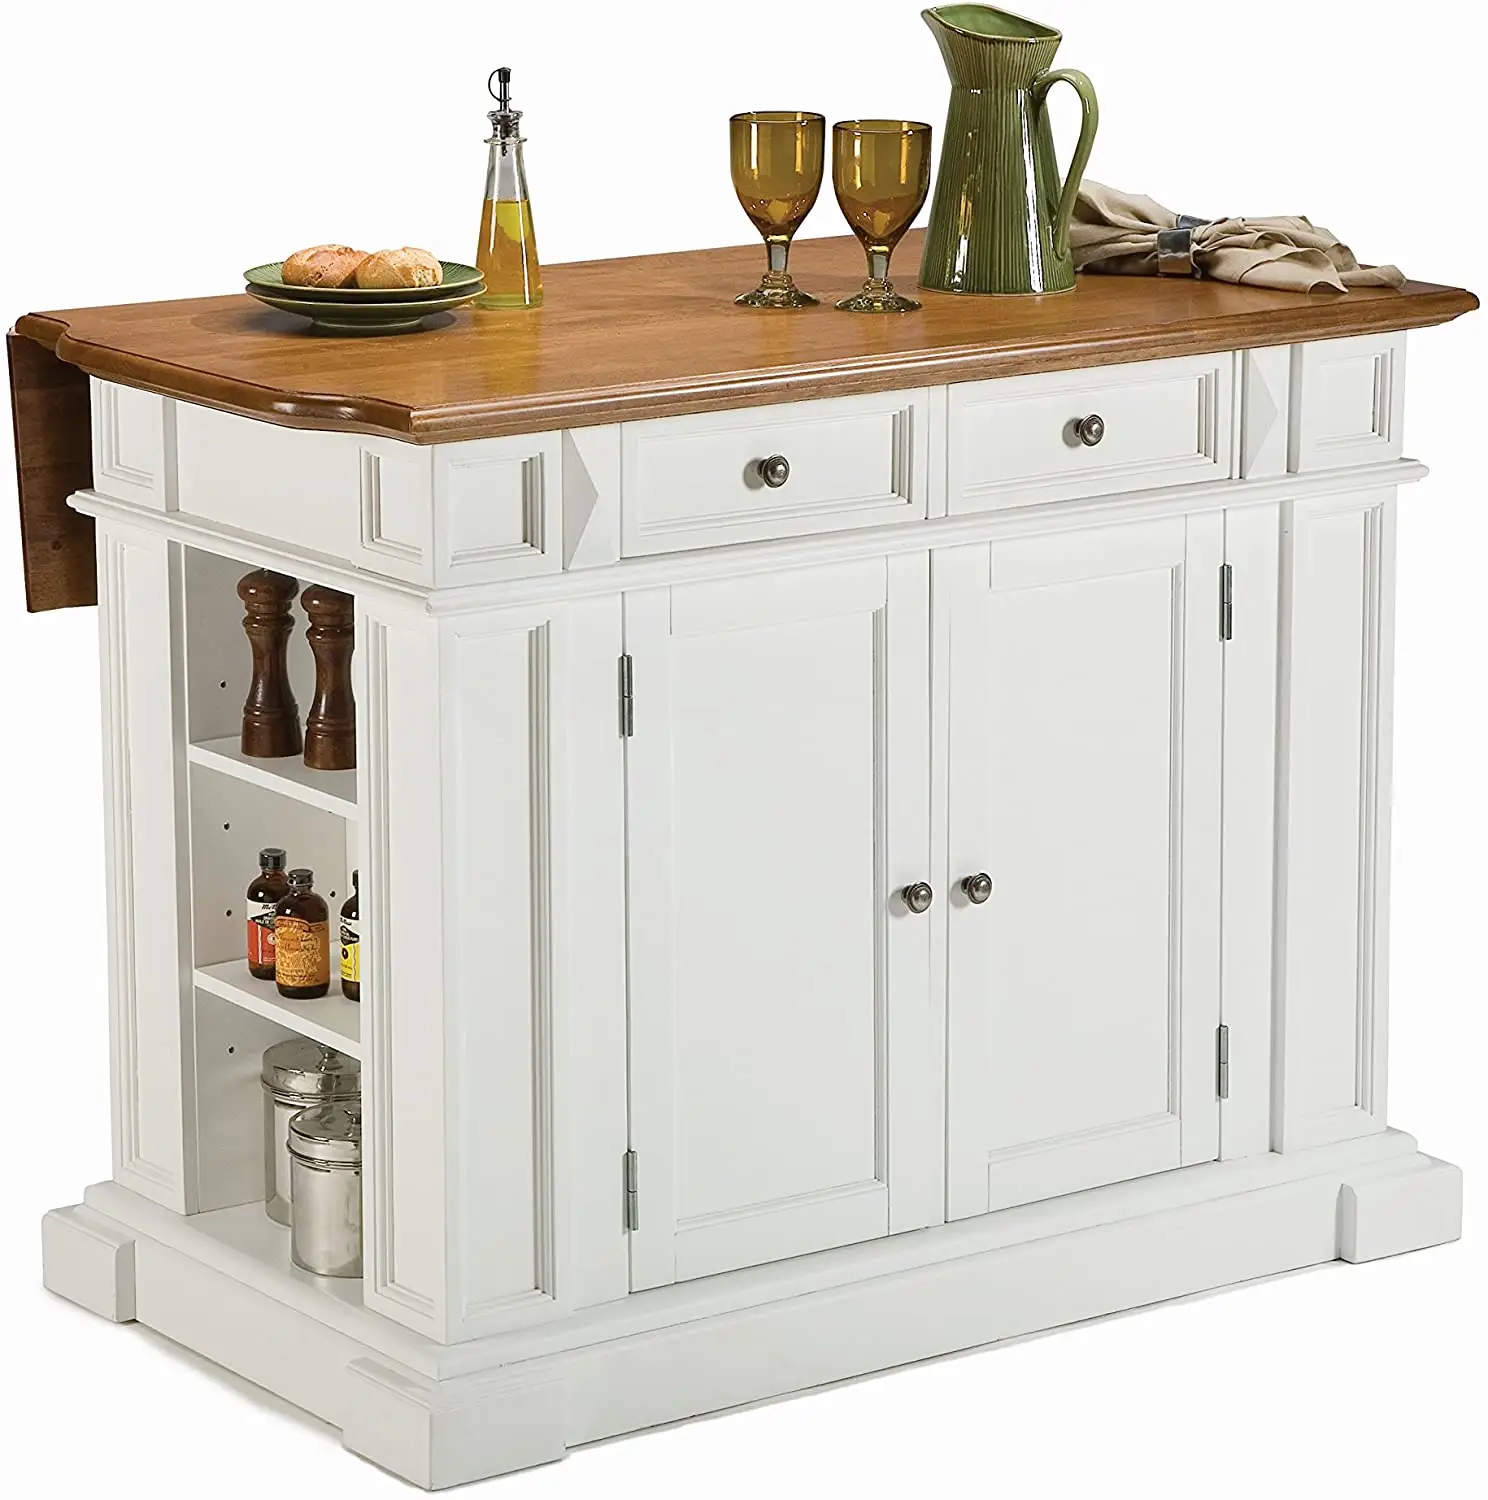 Americana Kitchen Island with Wood Top and Drop Leaf Breakfast Bar, Storage with Drawers and Adjustable Shelves